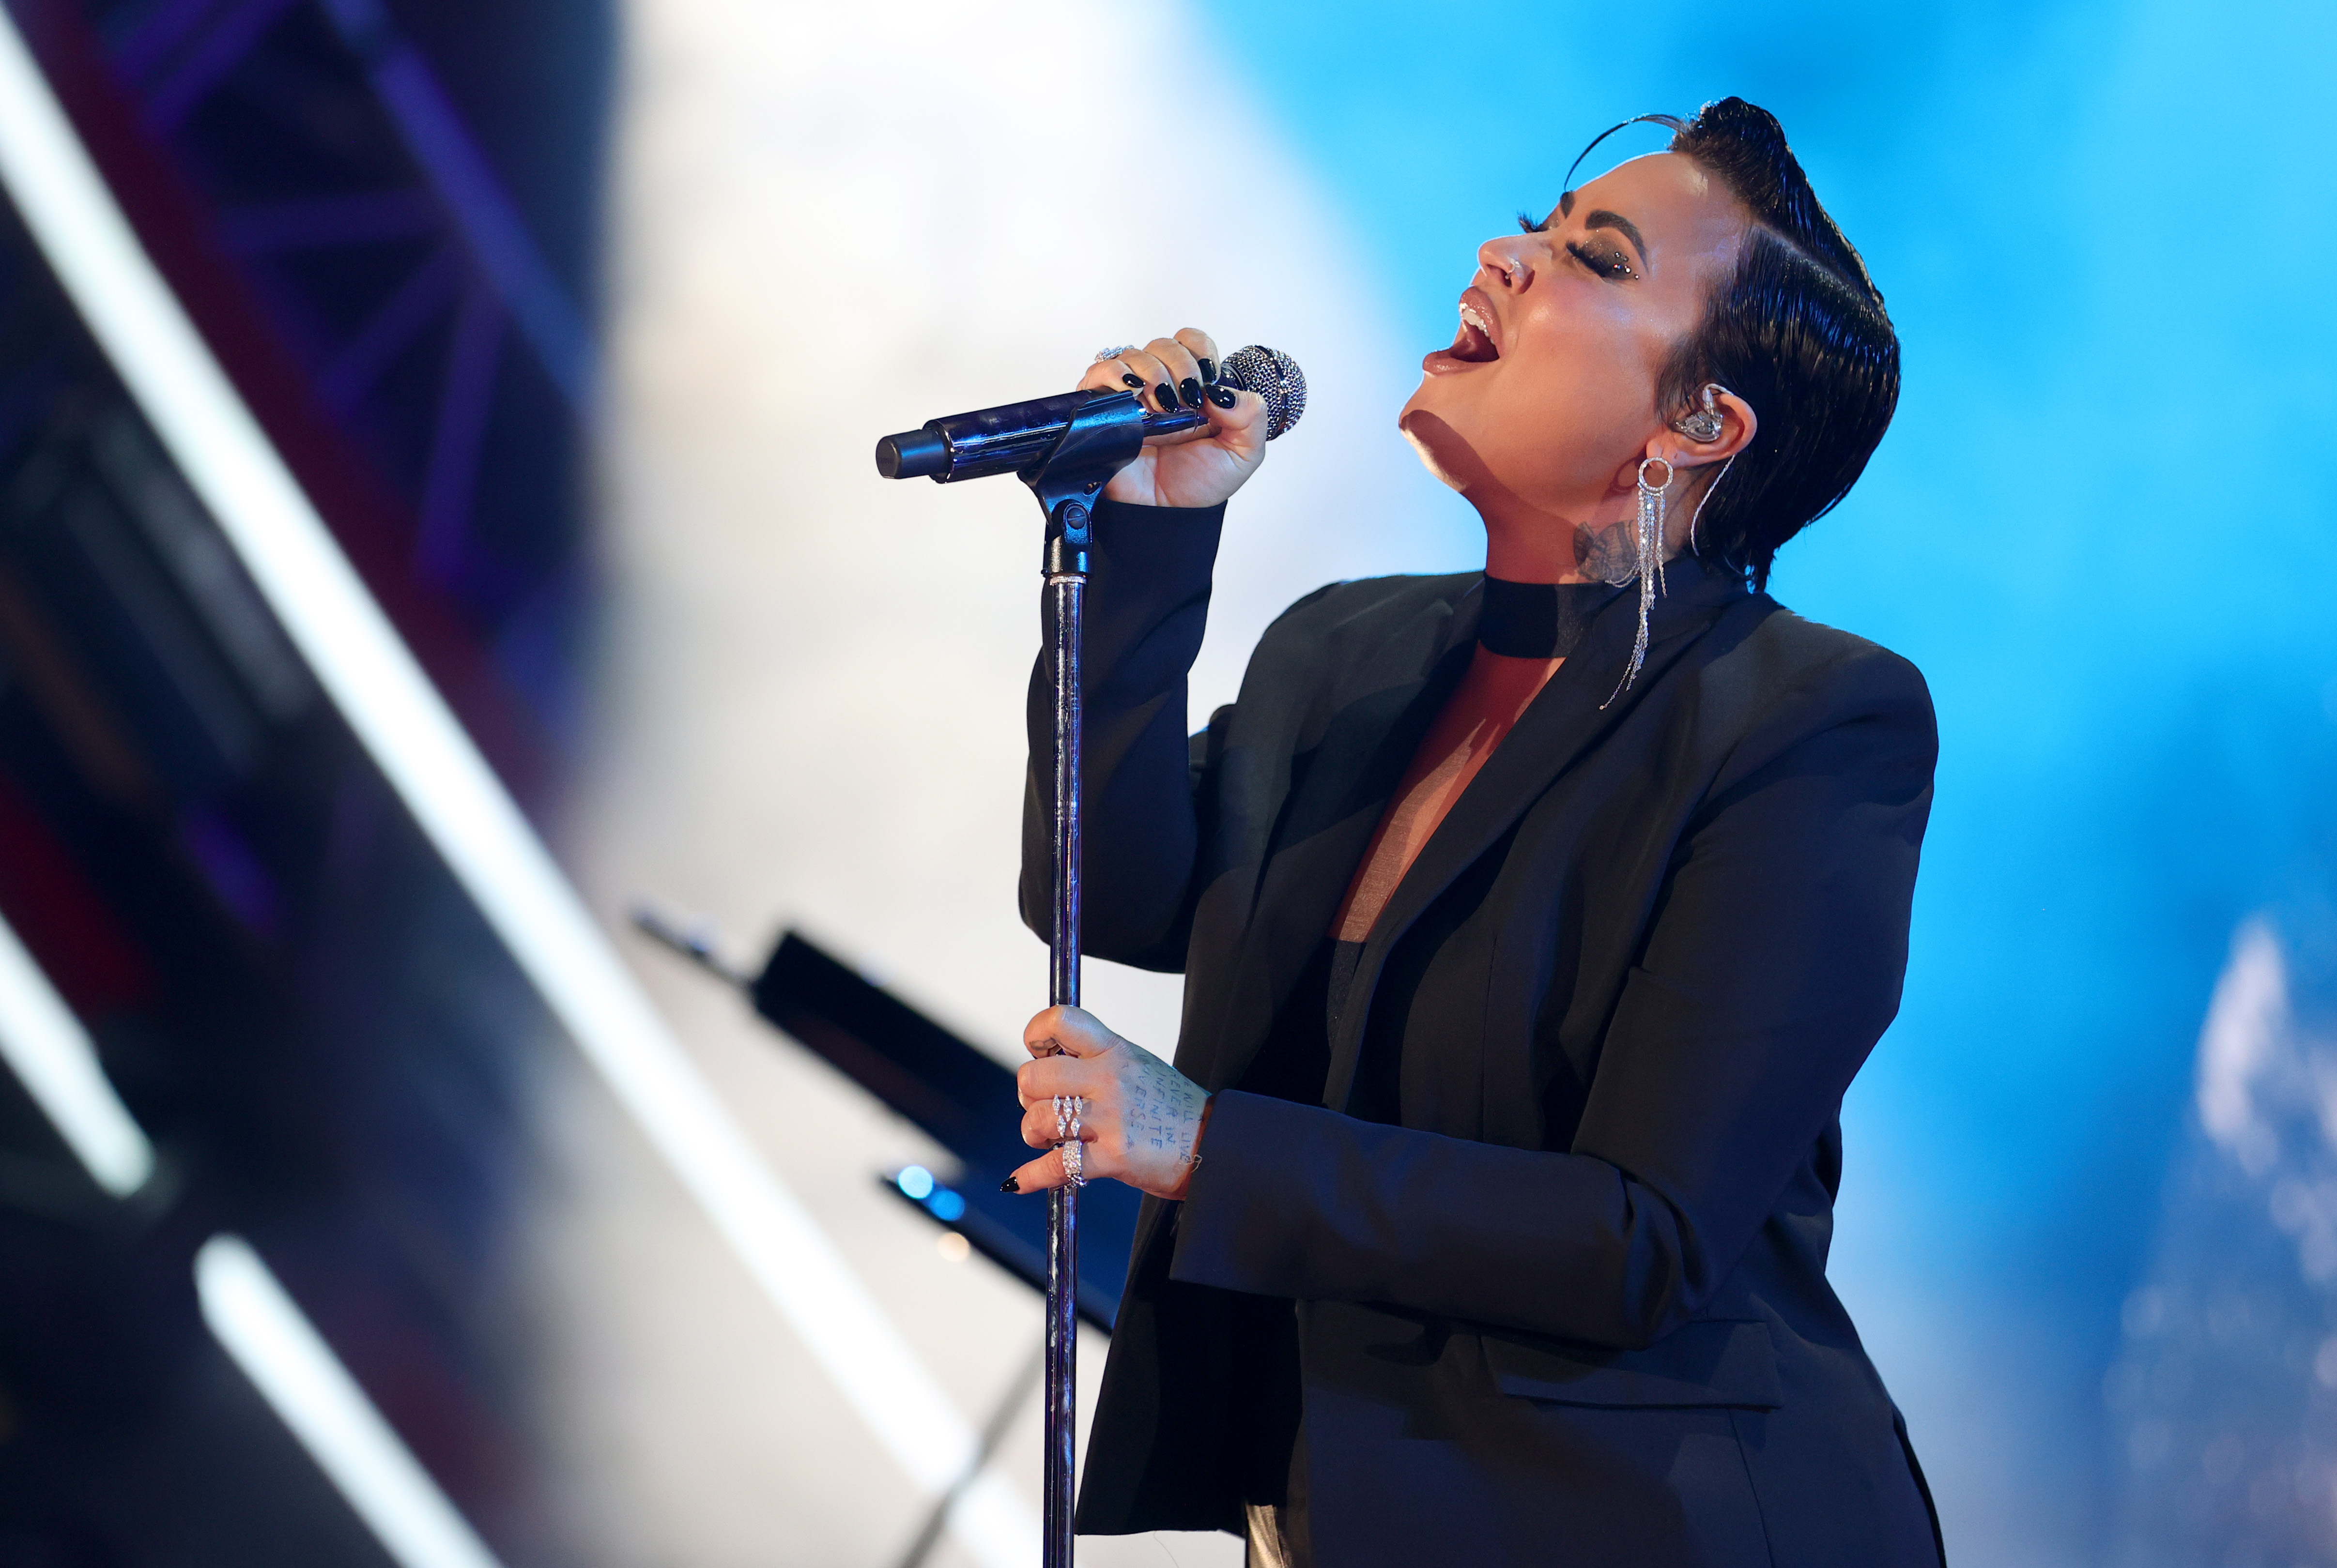 Demi Lovato performs onstage during Global Citizen Live on September 25, 2021 in Los Angeles, California.